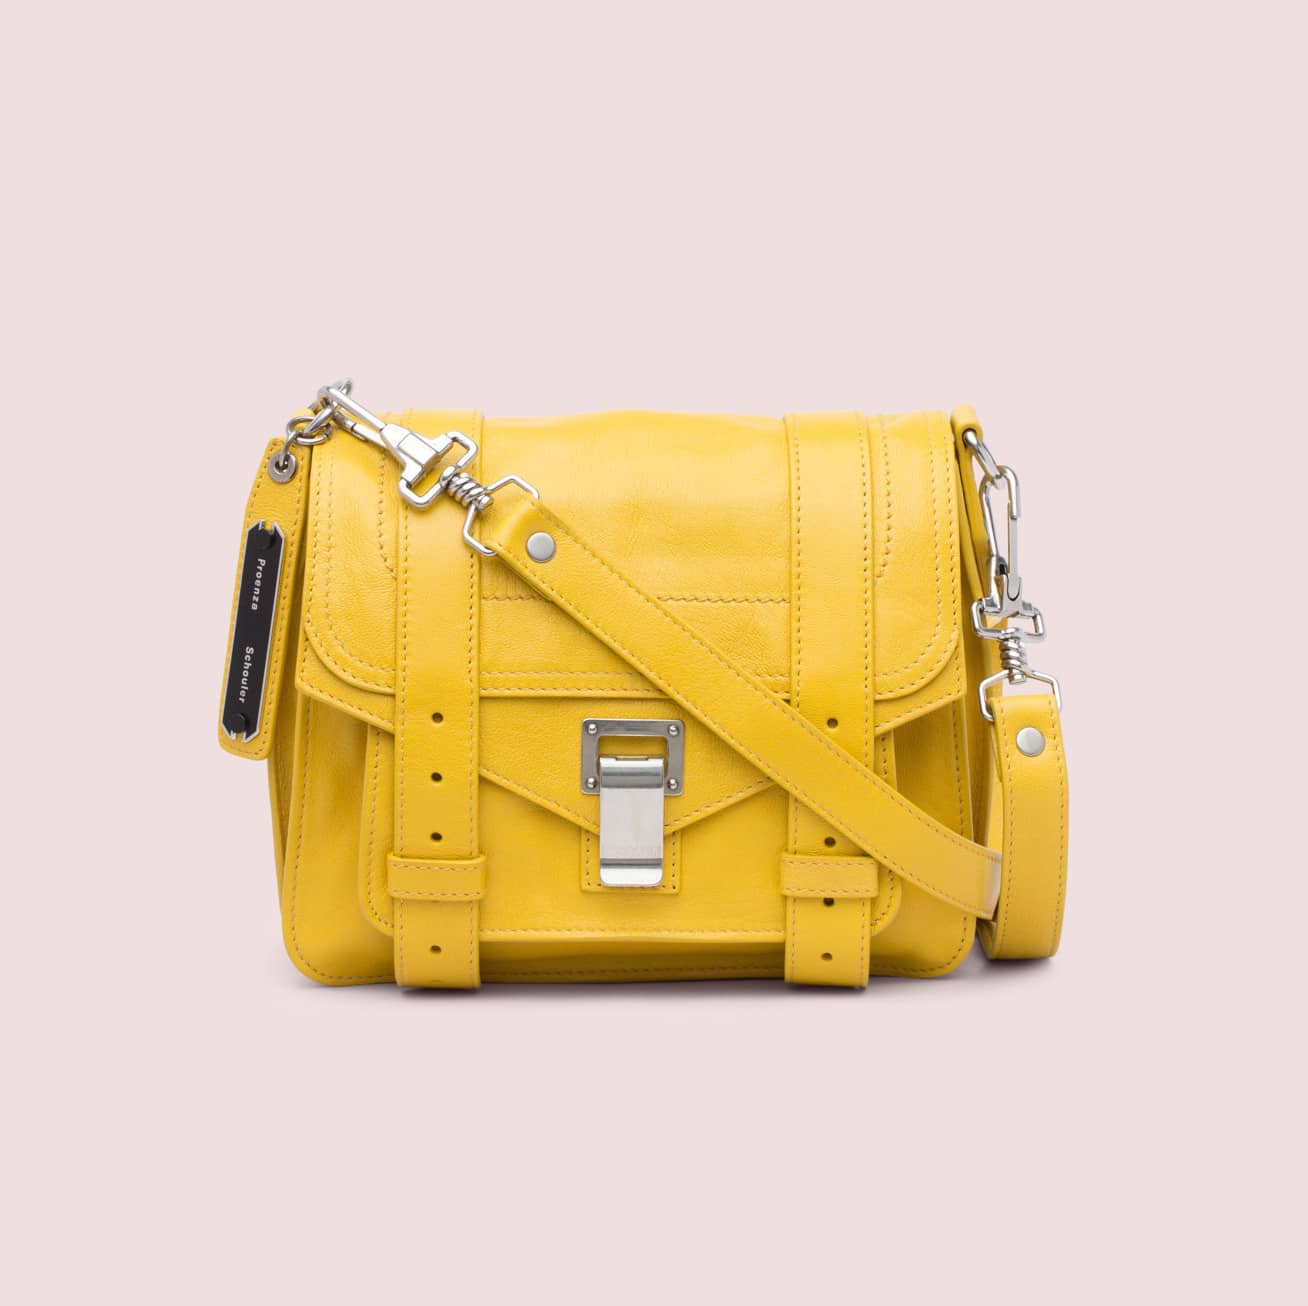 Proenza Schouler Pre-Fall 2015 Bag Collection | Spotted Fashion